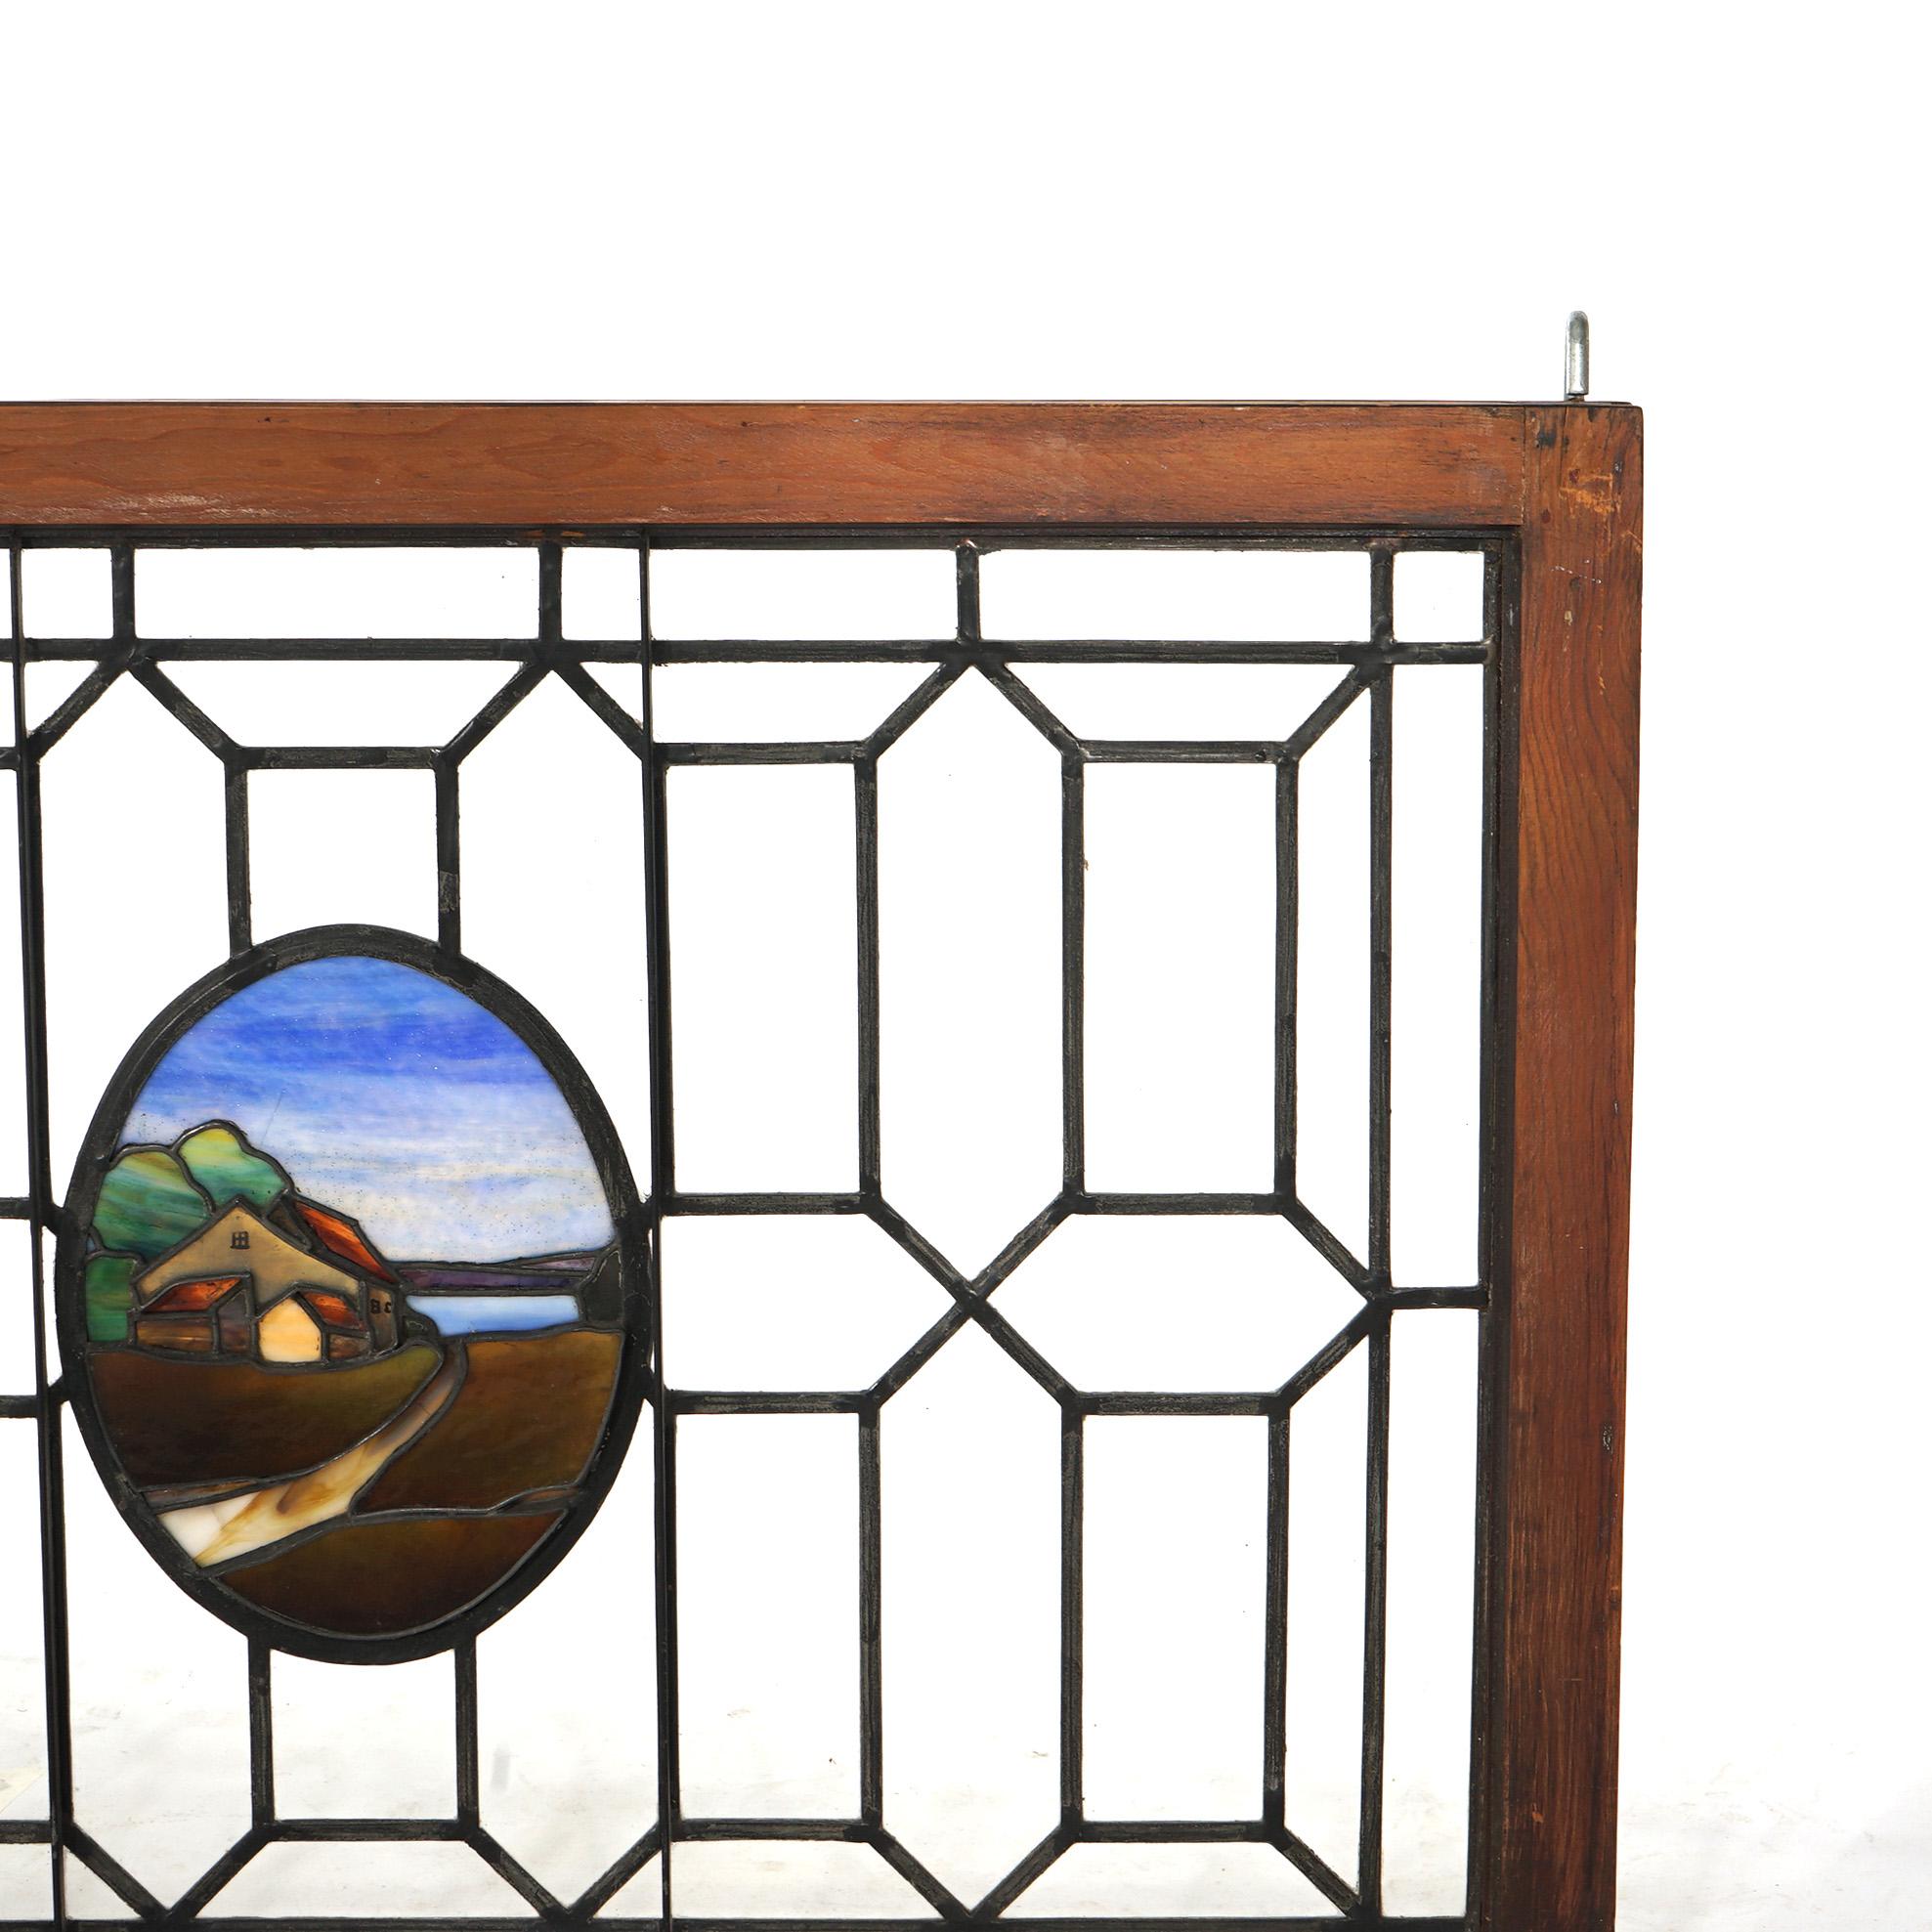 Antique Arts & Crafts Leaded & Stained Glass Window with Country Road circa 1910 For Sale 5